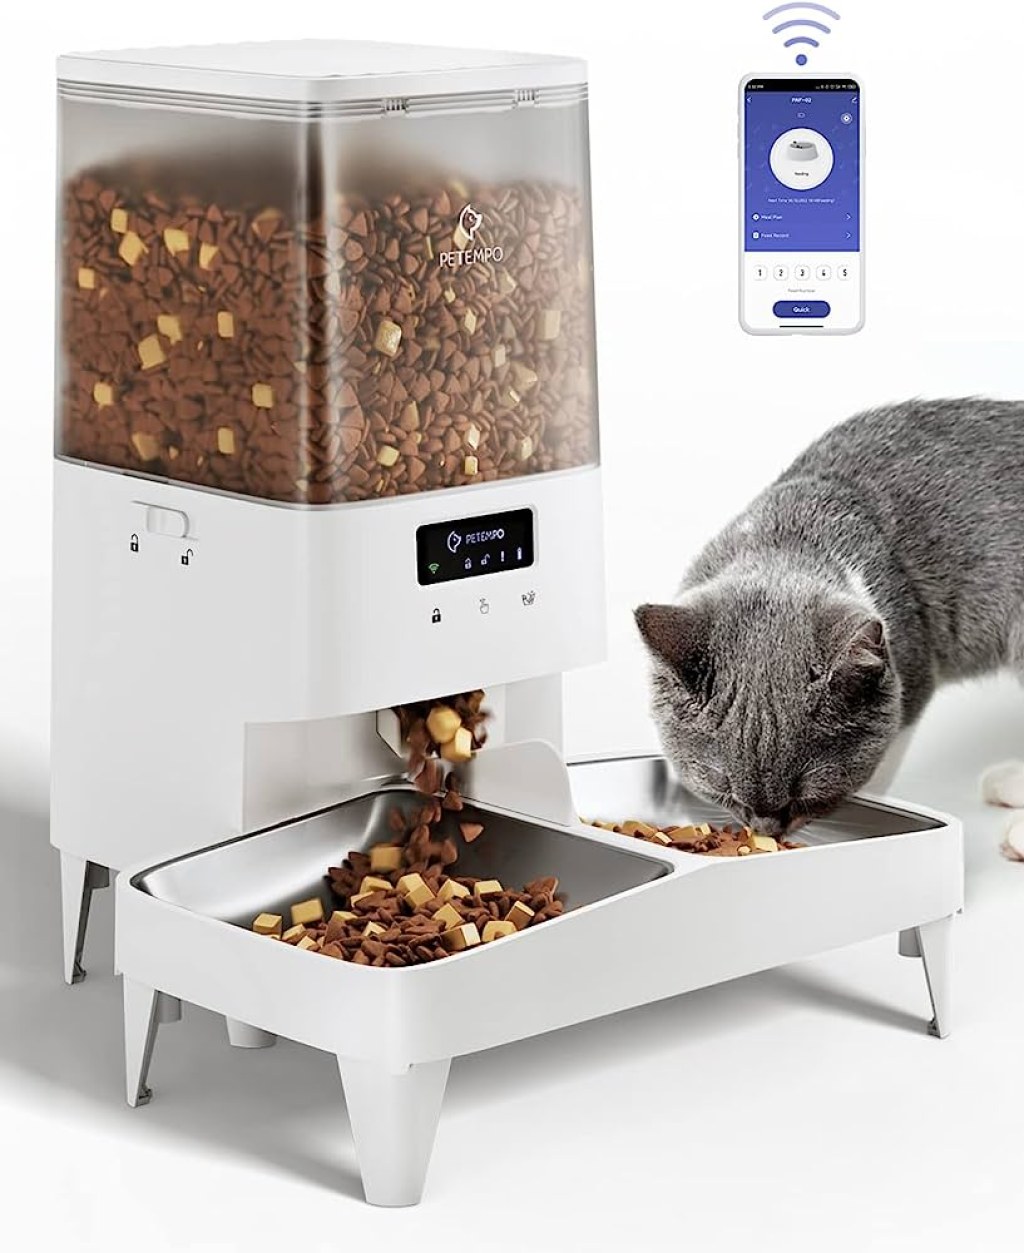 Picture of: Automatic Cat Feeders, WiFi L Automatic Pet Feeder with Anti-Stuck Design,  Programmable Cat Food Dispenser for – Cats and Dogs,  Portion 0 Meal